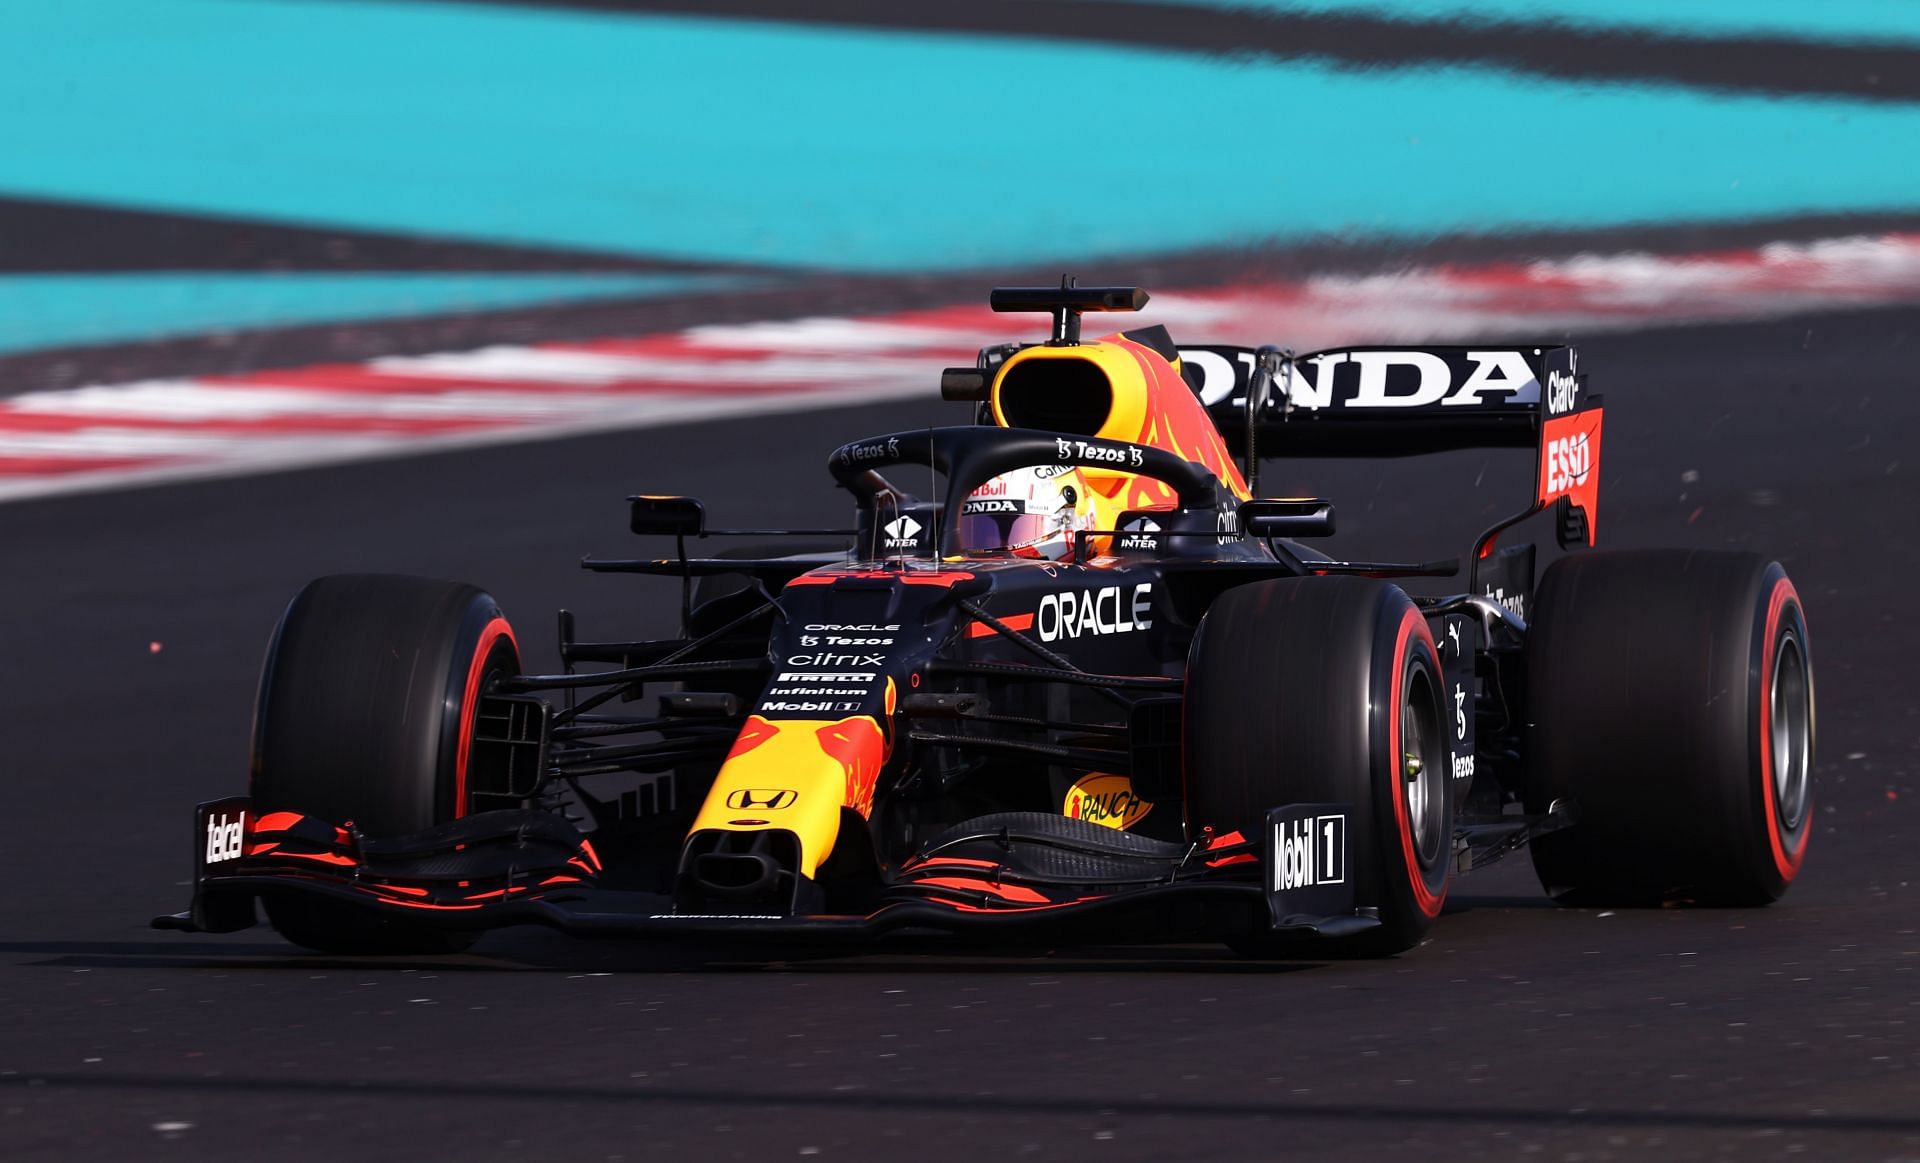 F1 Grand Prix of Abu Dhabi - Max Verstappen tests out the new circuit.